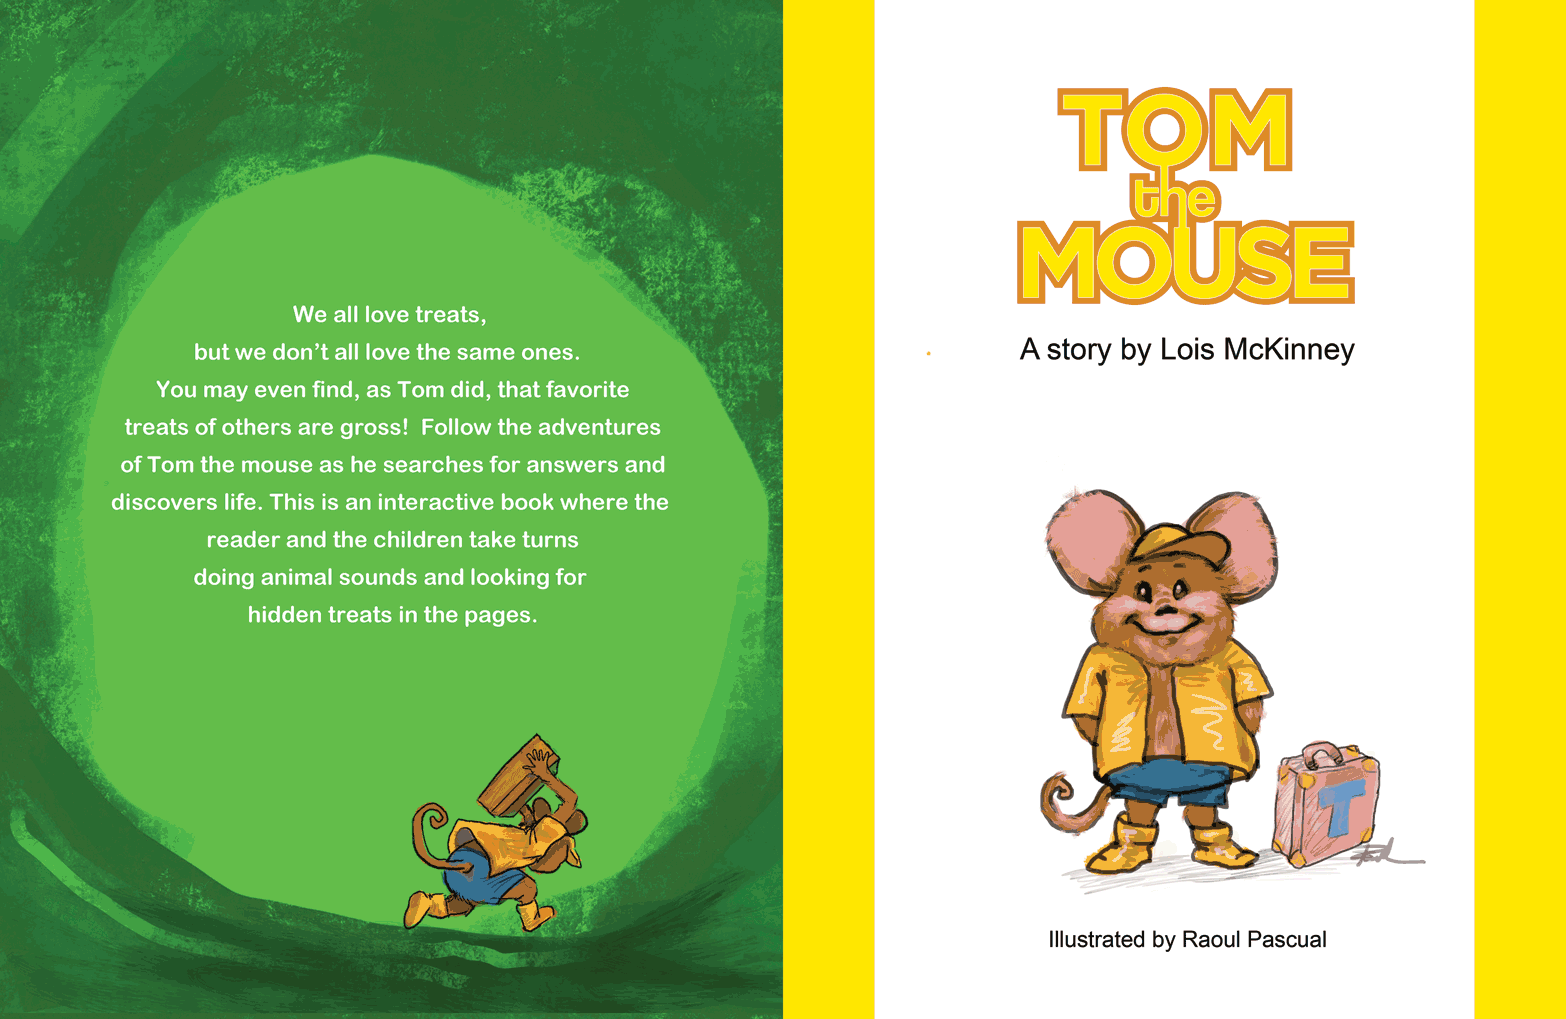 Tom the Mouse